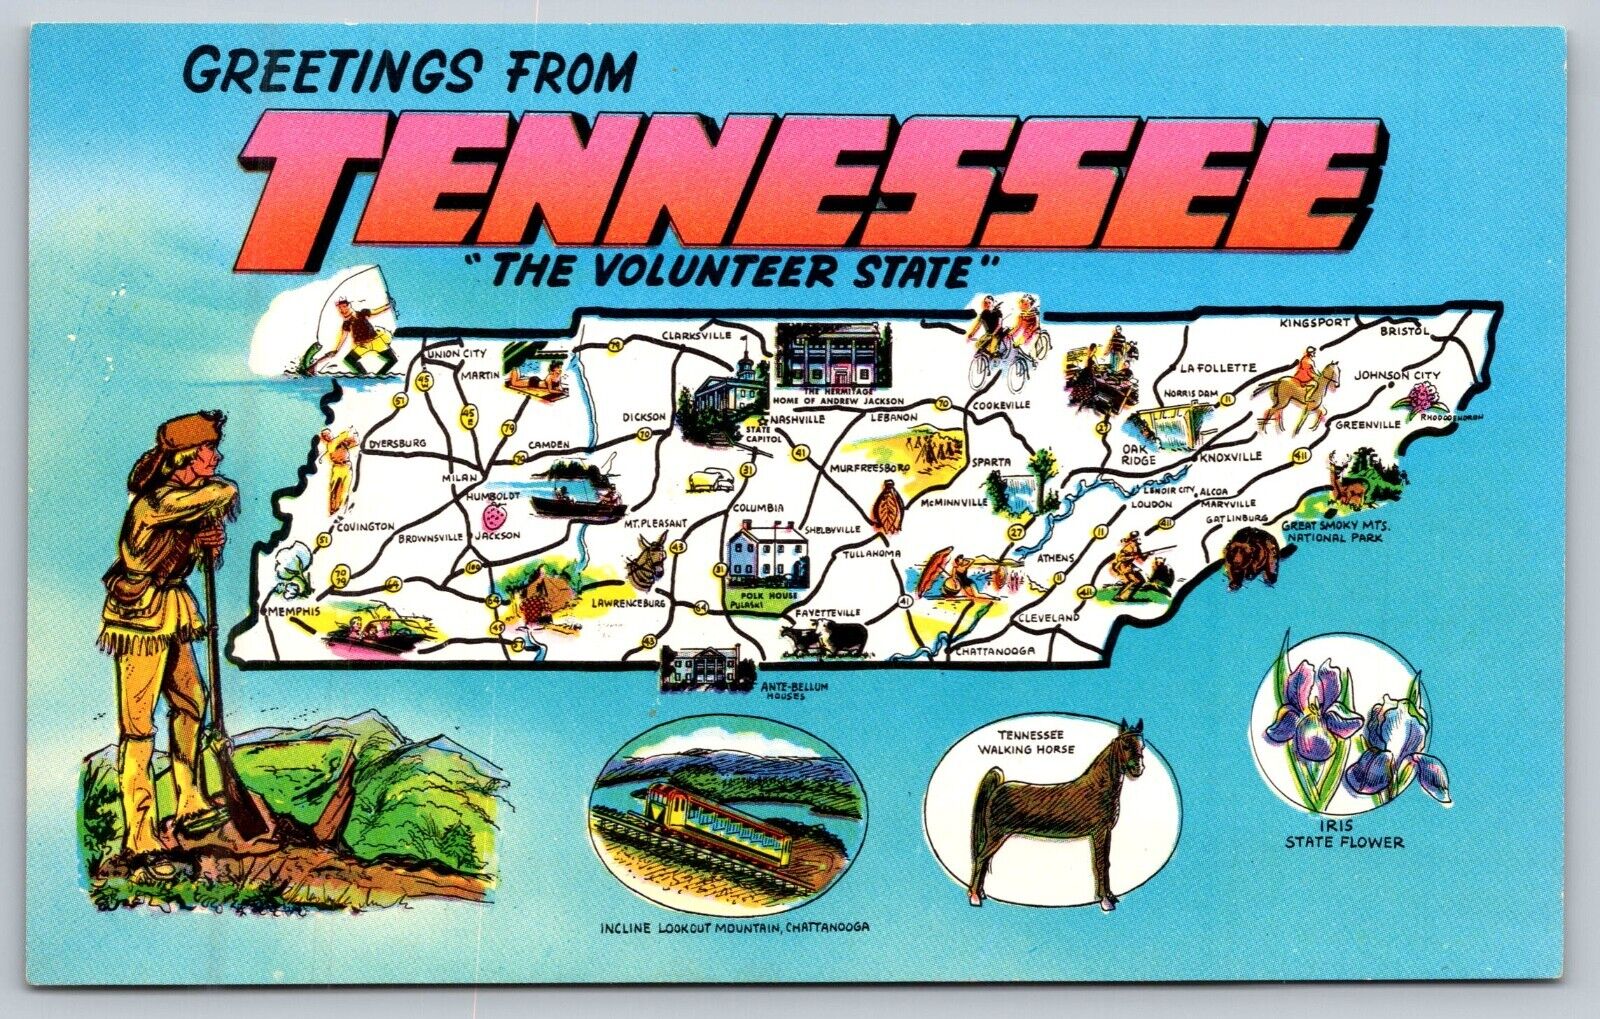 Vintage Postcard 1969 Greetings From Tennessee The Volunteer State Nashville TN